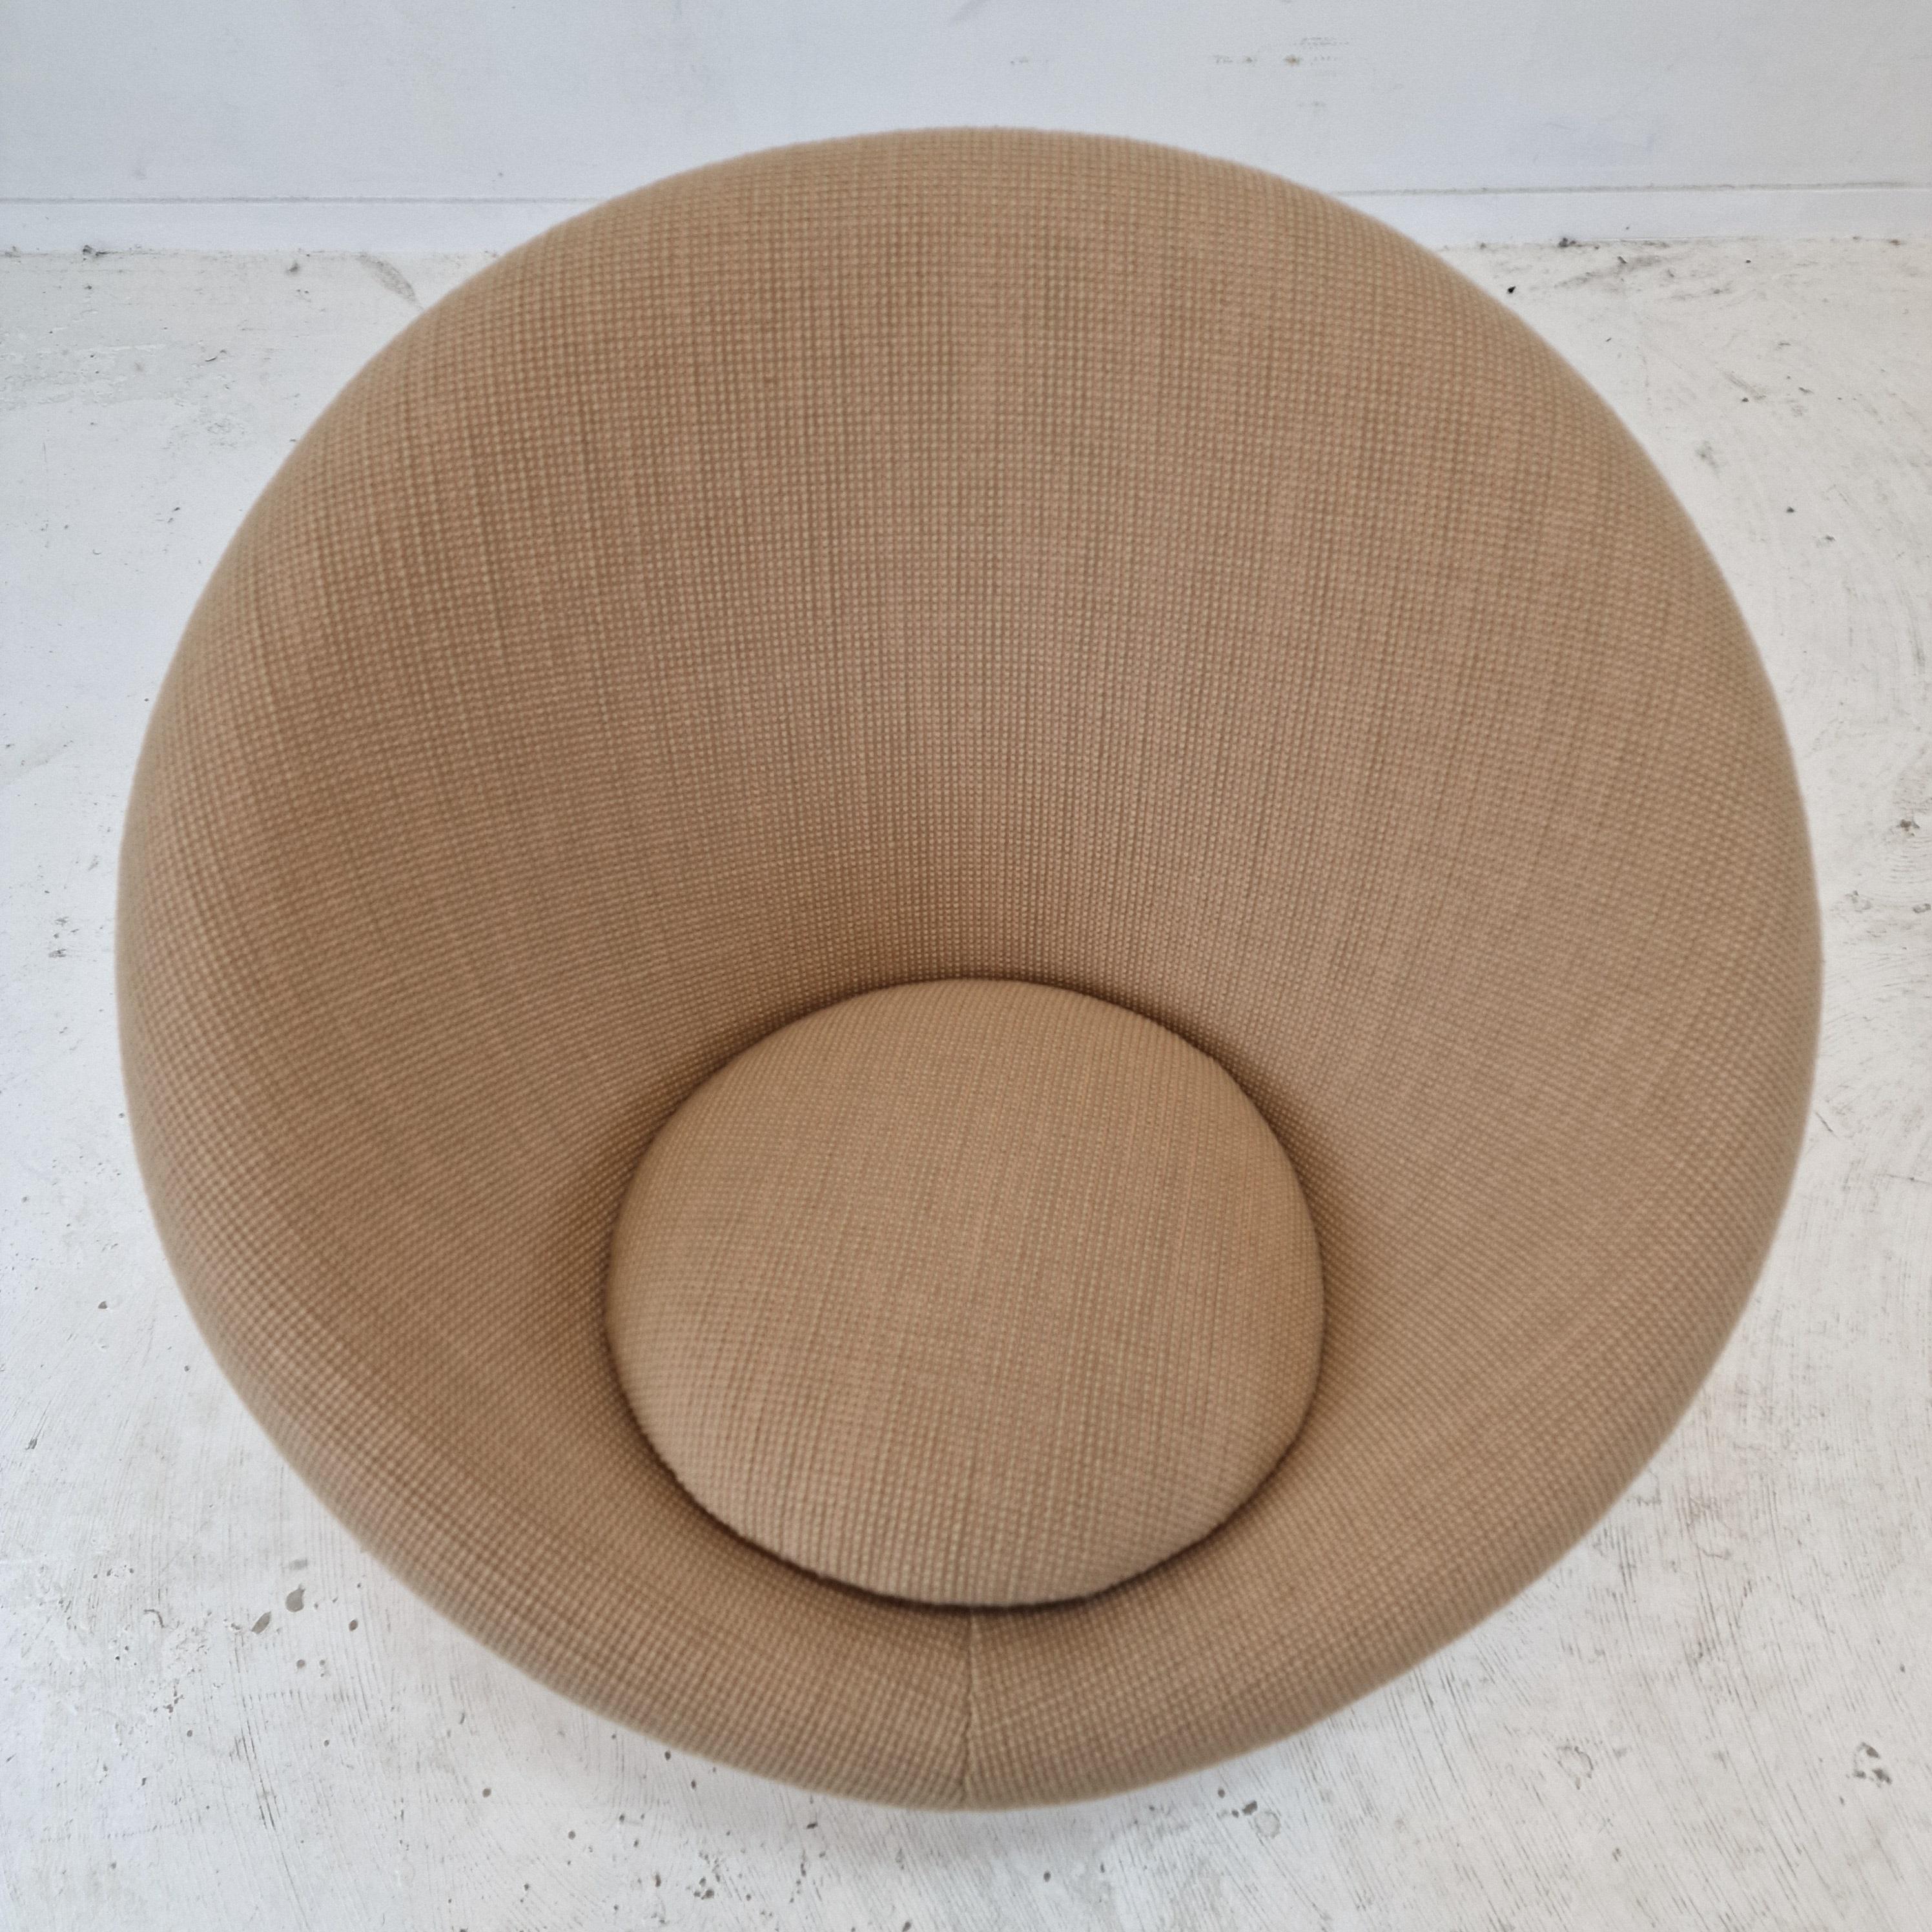 Fabric Mushroom Armchair by Pierre Paulin for Artifort, 1980s For Sale